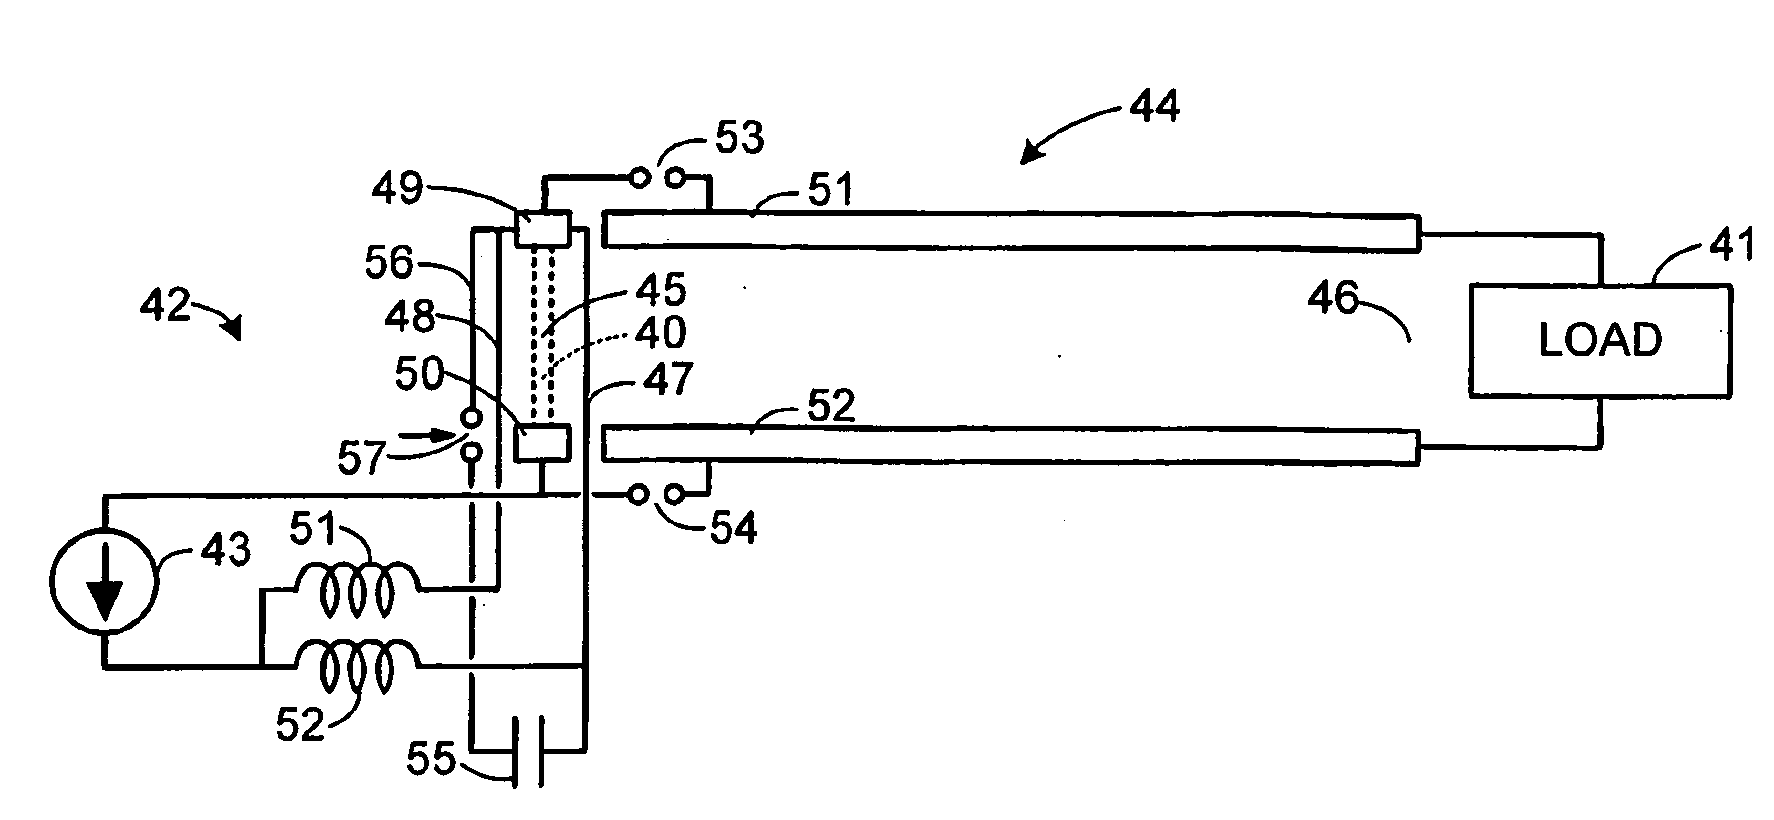 Pulsed Power System Including a Plasma Opening Switch